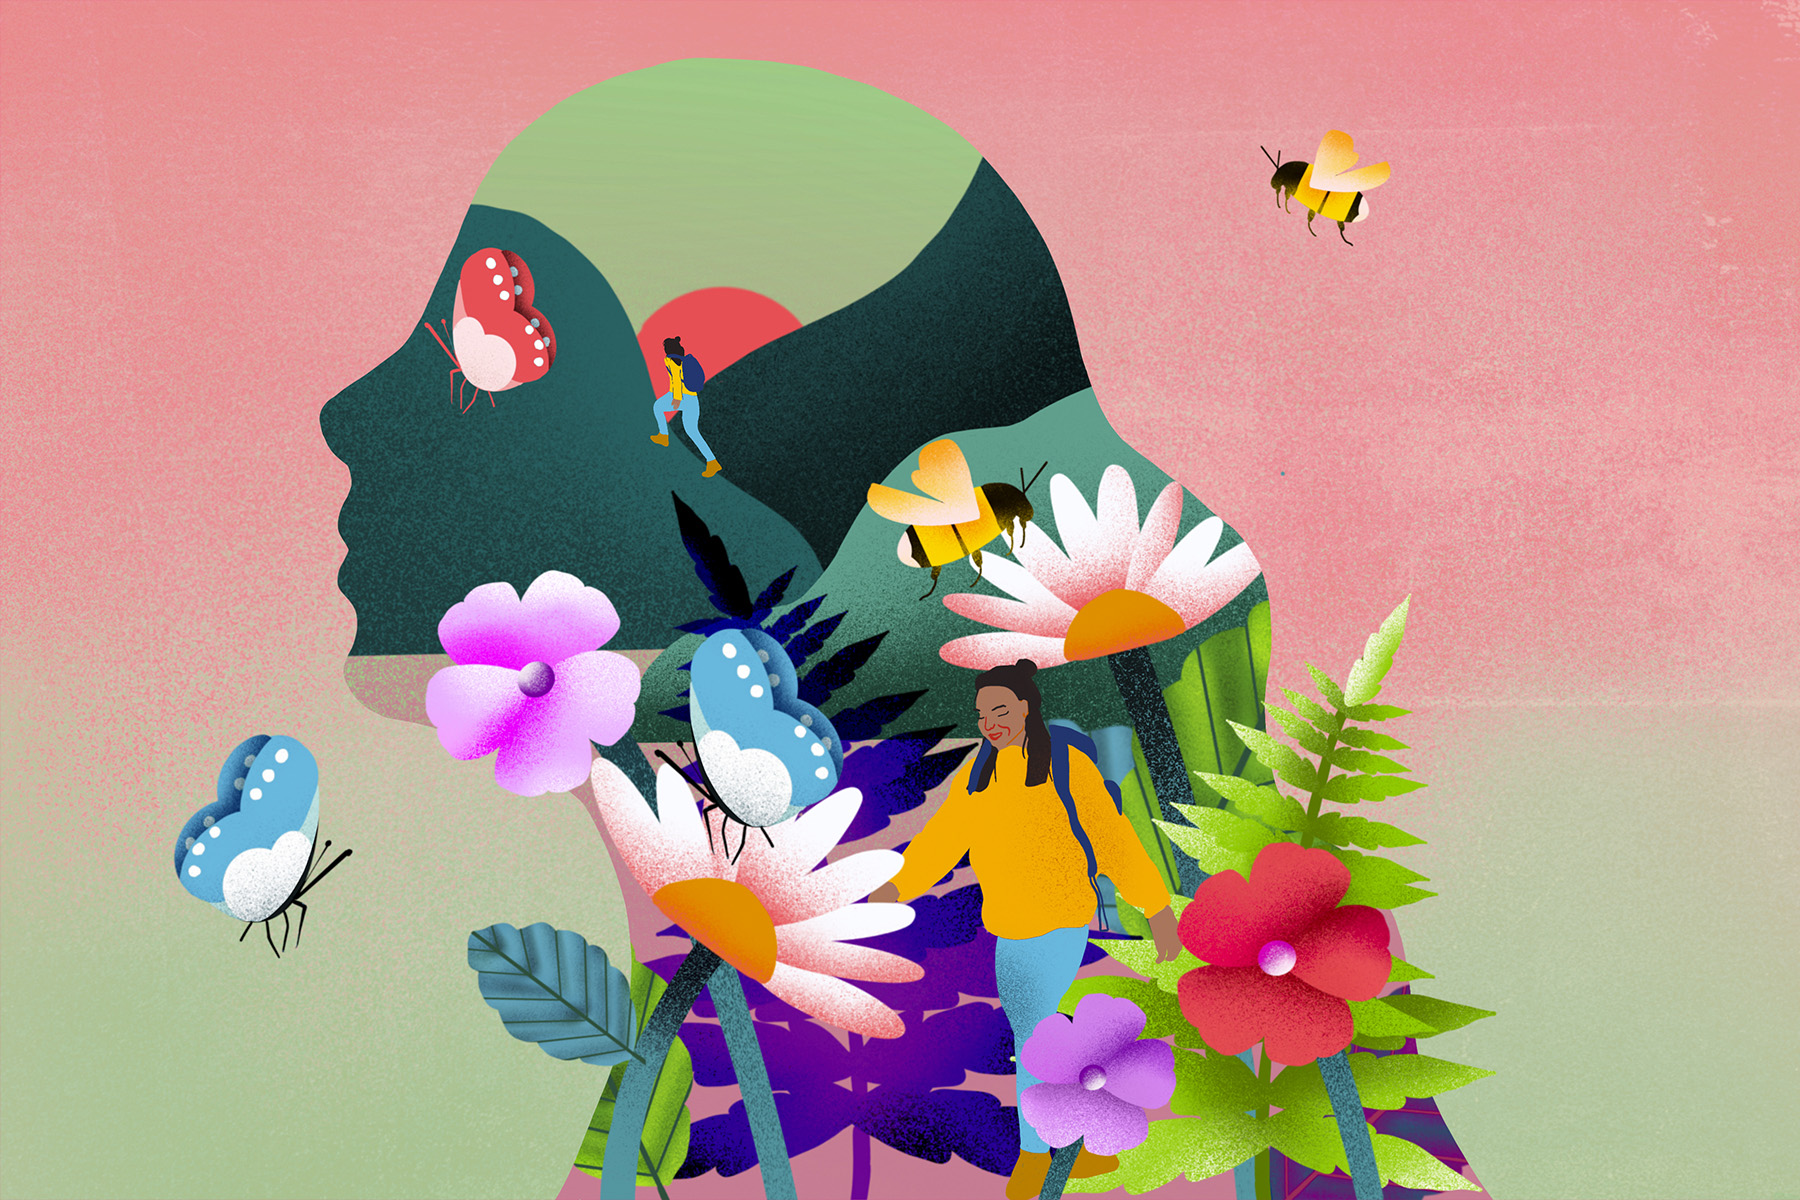 an illustration of a woman's silhouette filled with flowers and butterflies